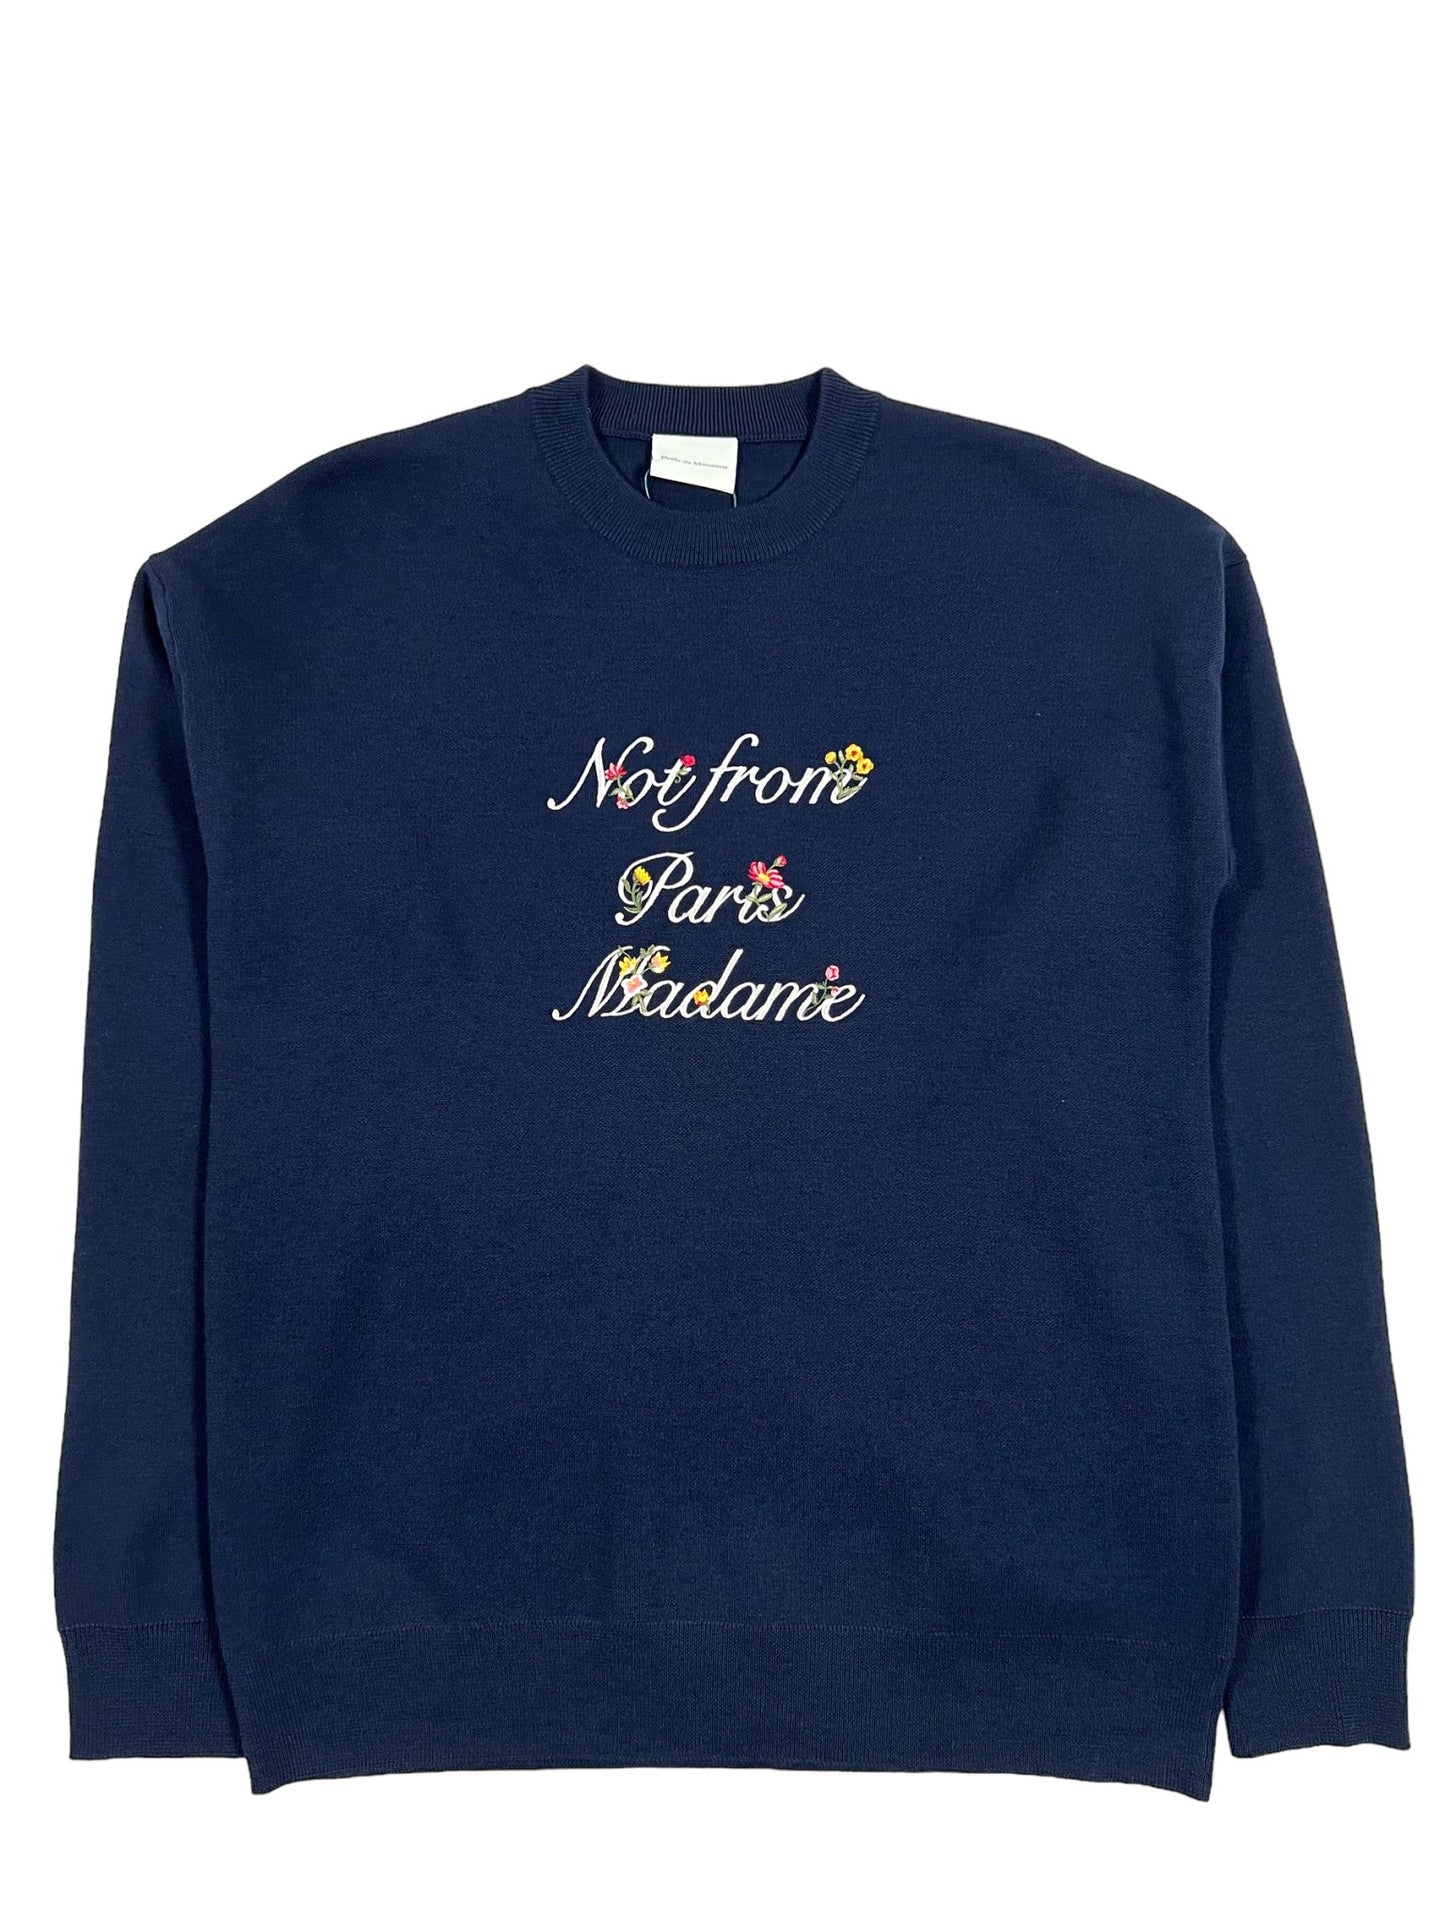 A DROLE DE MONSIEUR sweatshirt C-PO133-WO007-NY La Maille Slogan Fleurs Navy with the words 'not for the machine' embroidered on it.